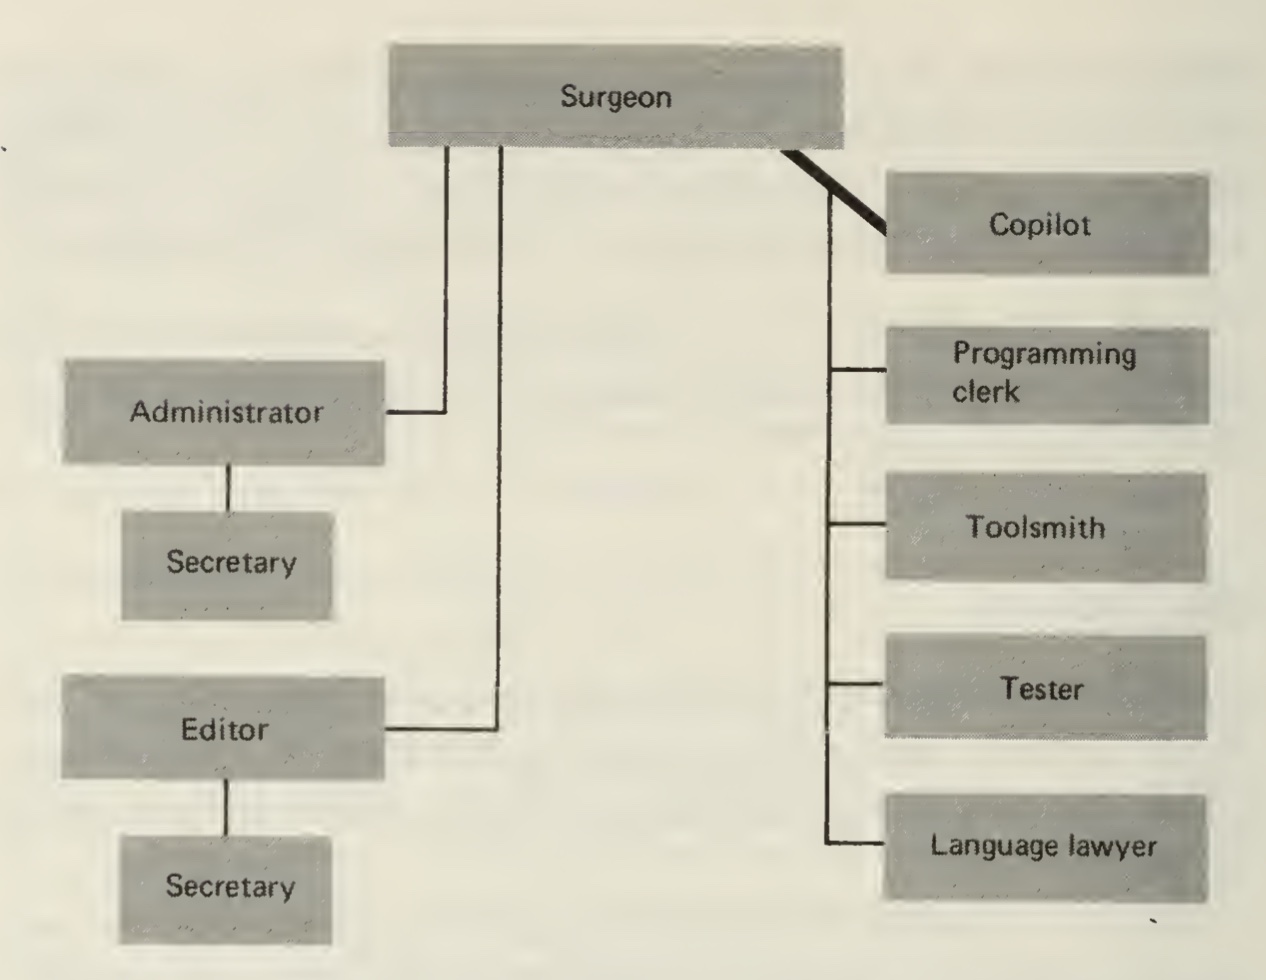 Communication pattern in the surgical team. Source: Brooks, 1974.